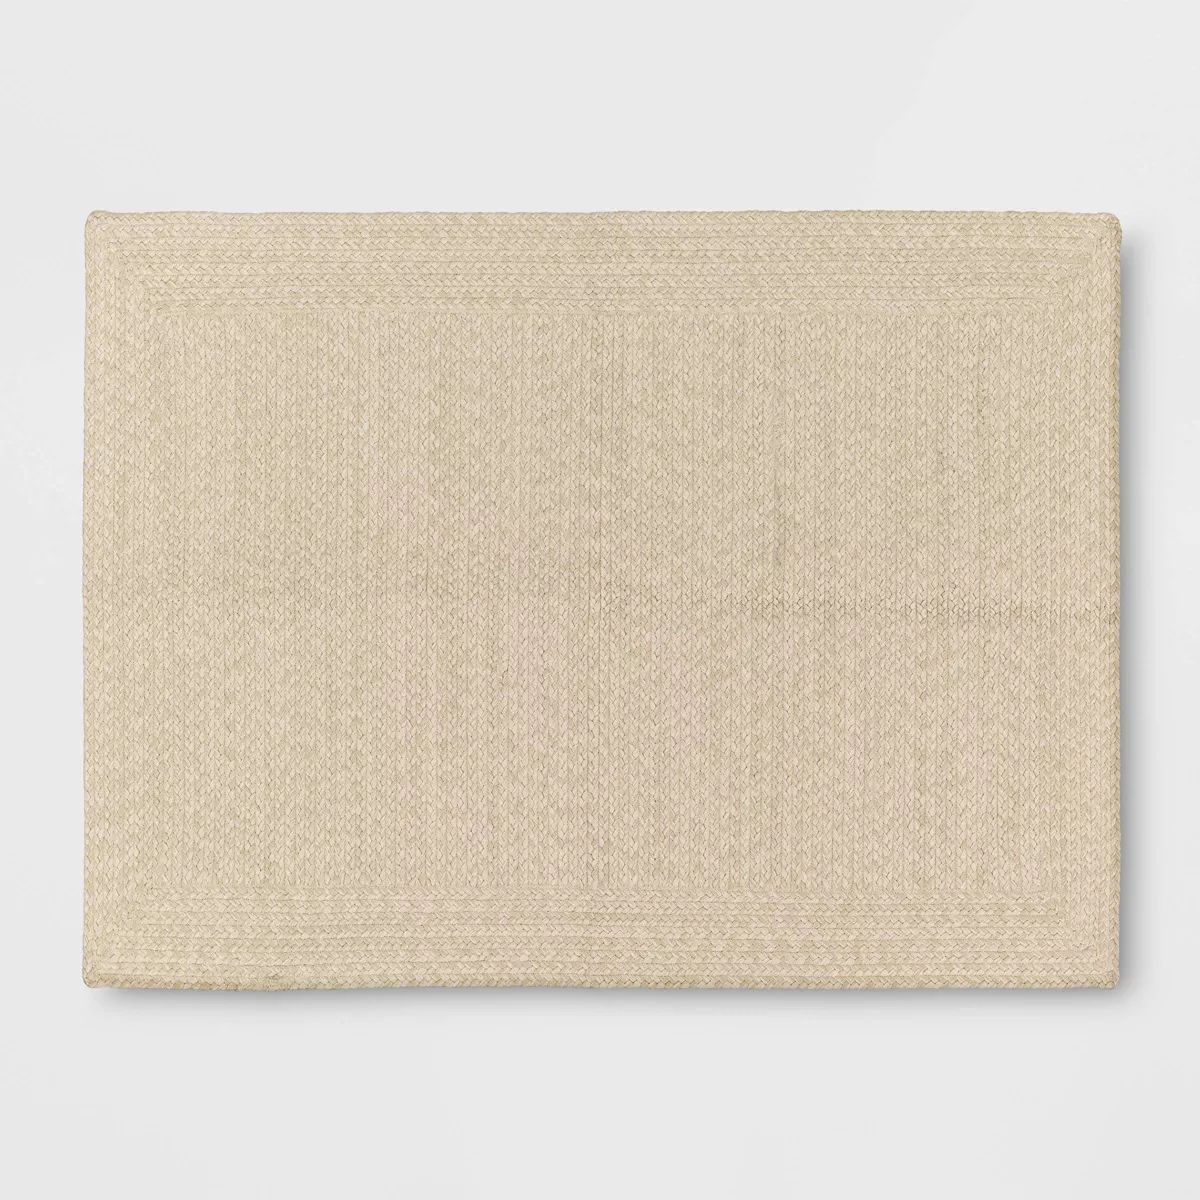 2'6"x4'2" Natural Woven Rectangular Braided Outdoor Accent Rug Heathered Cream - Threshold™ | Target